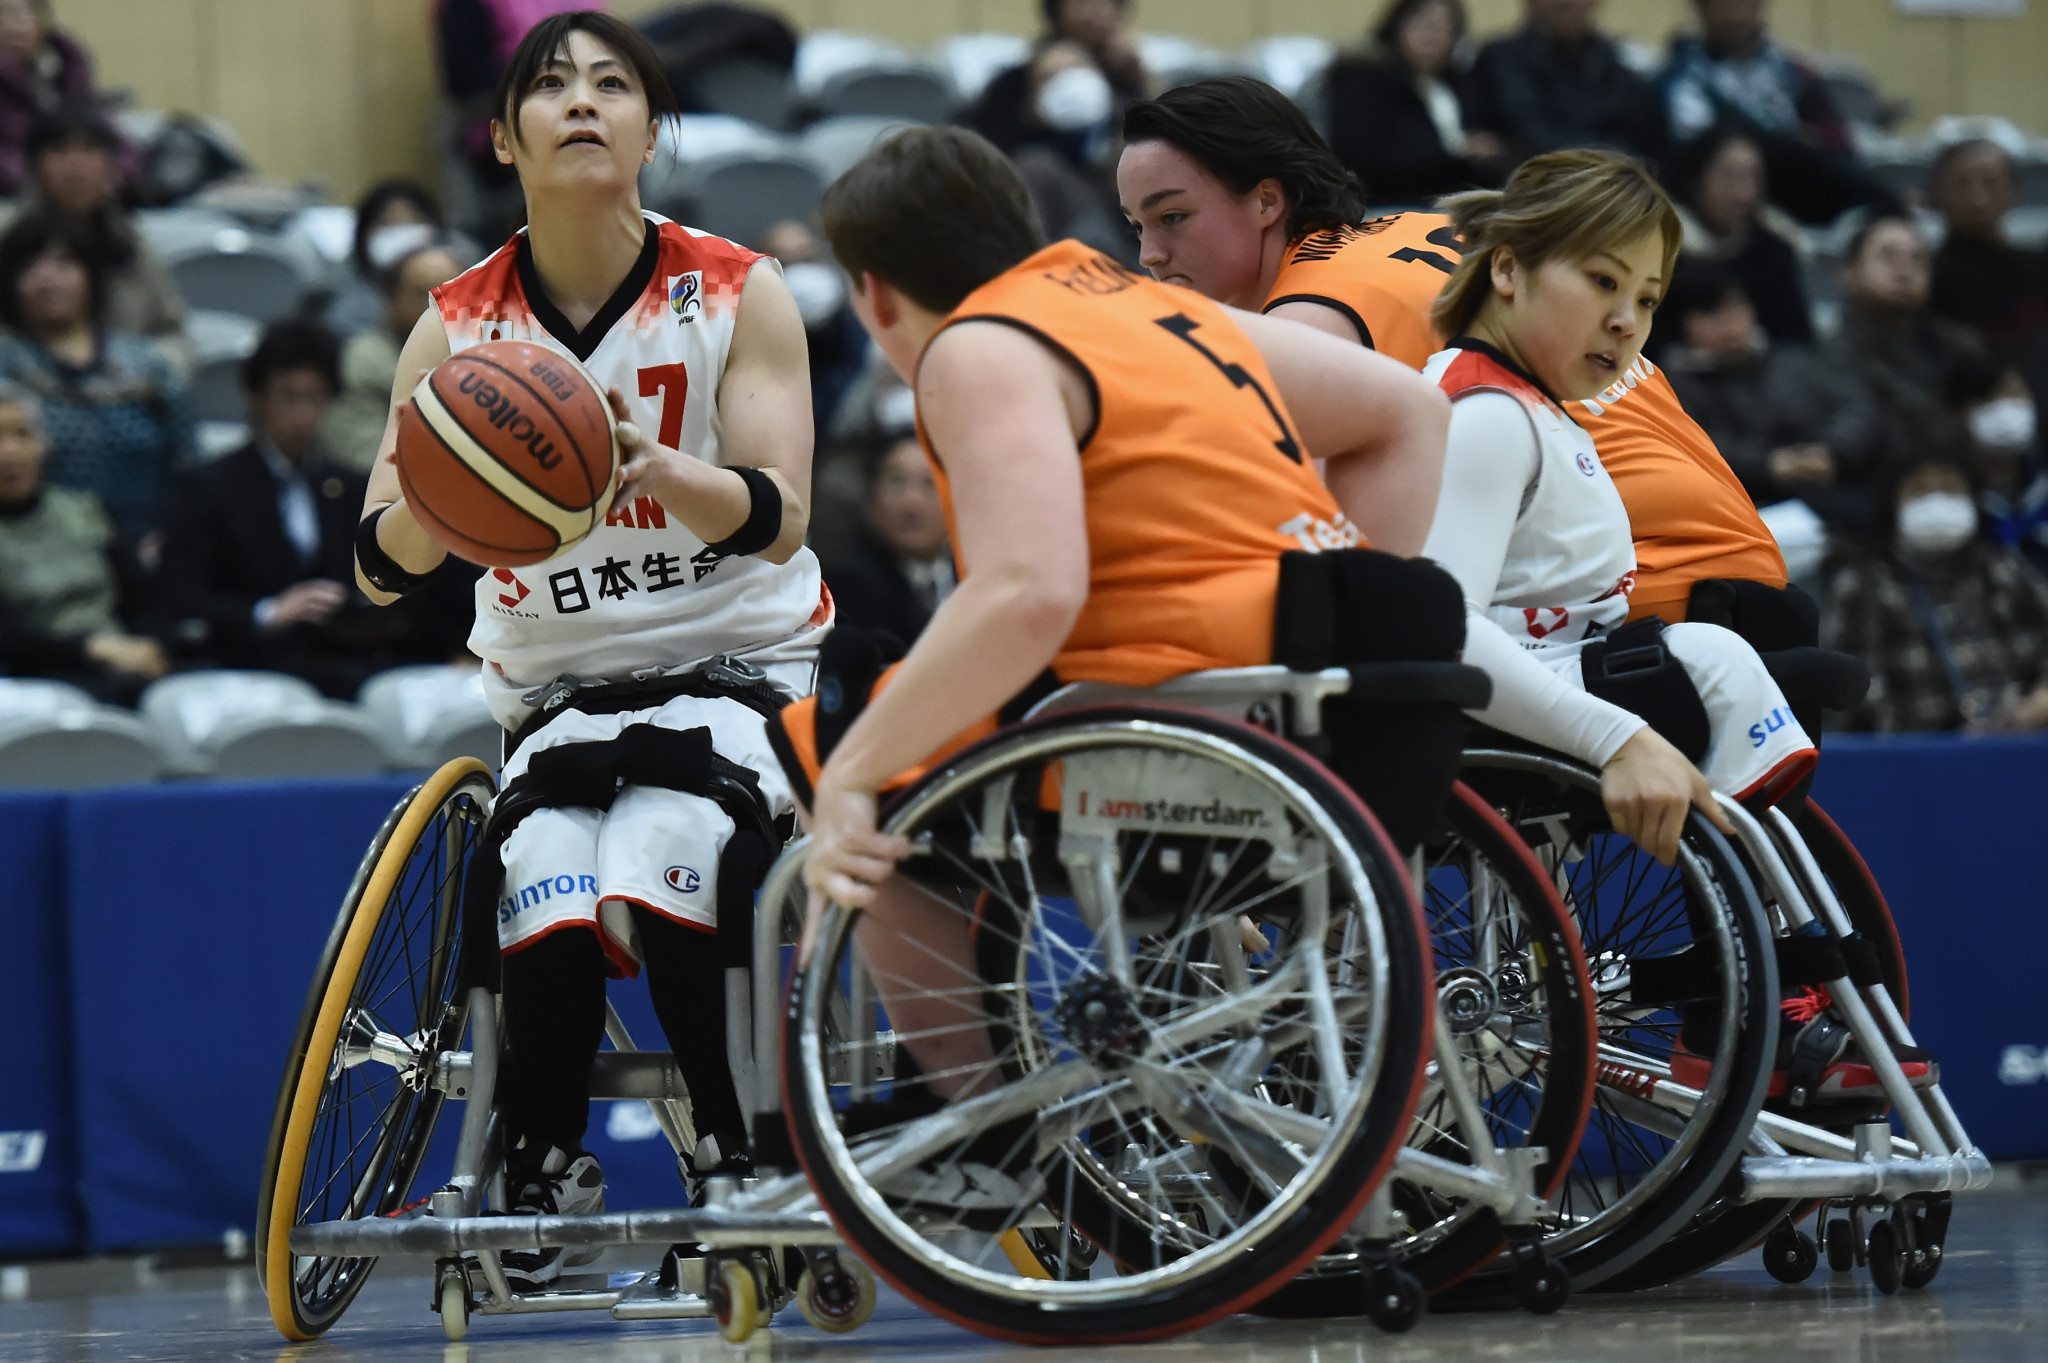 The IPC's dispute with the IWBF stems from the IWBF being found non-compliant with the 2015 IPC Athlete Classification Code ©Getty Images